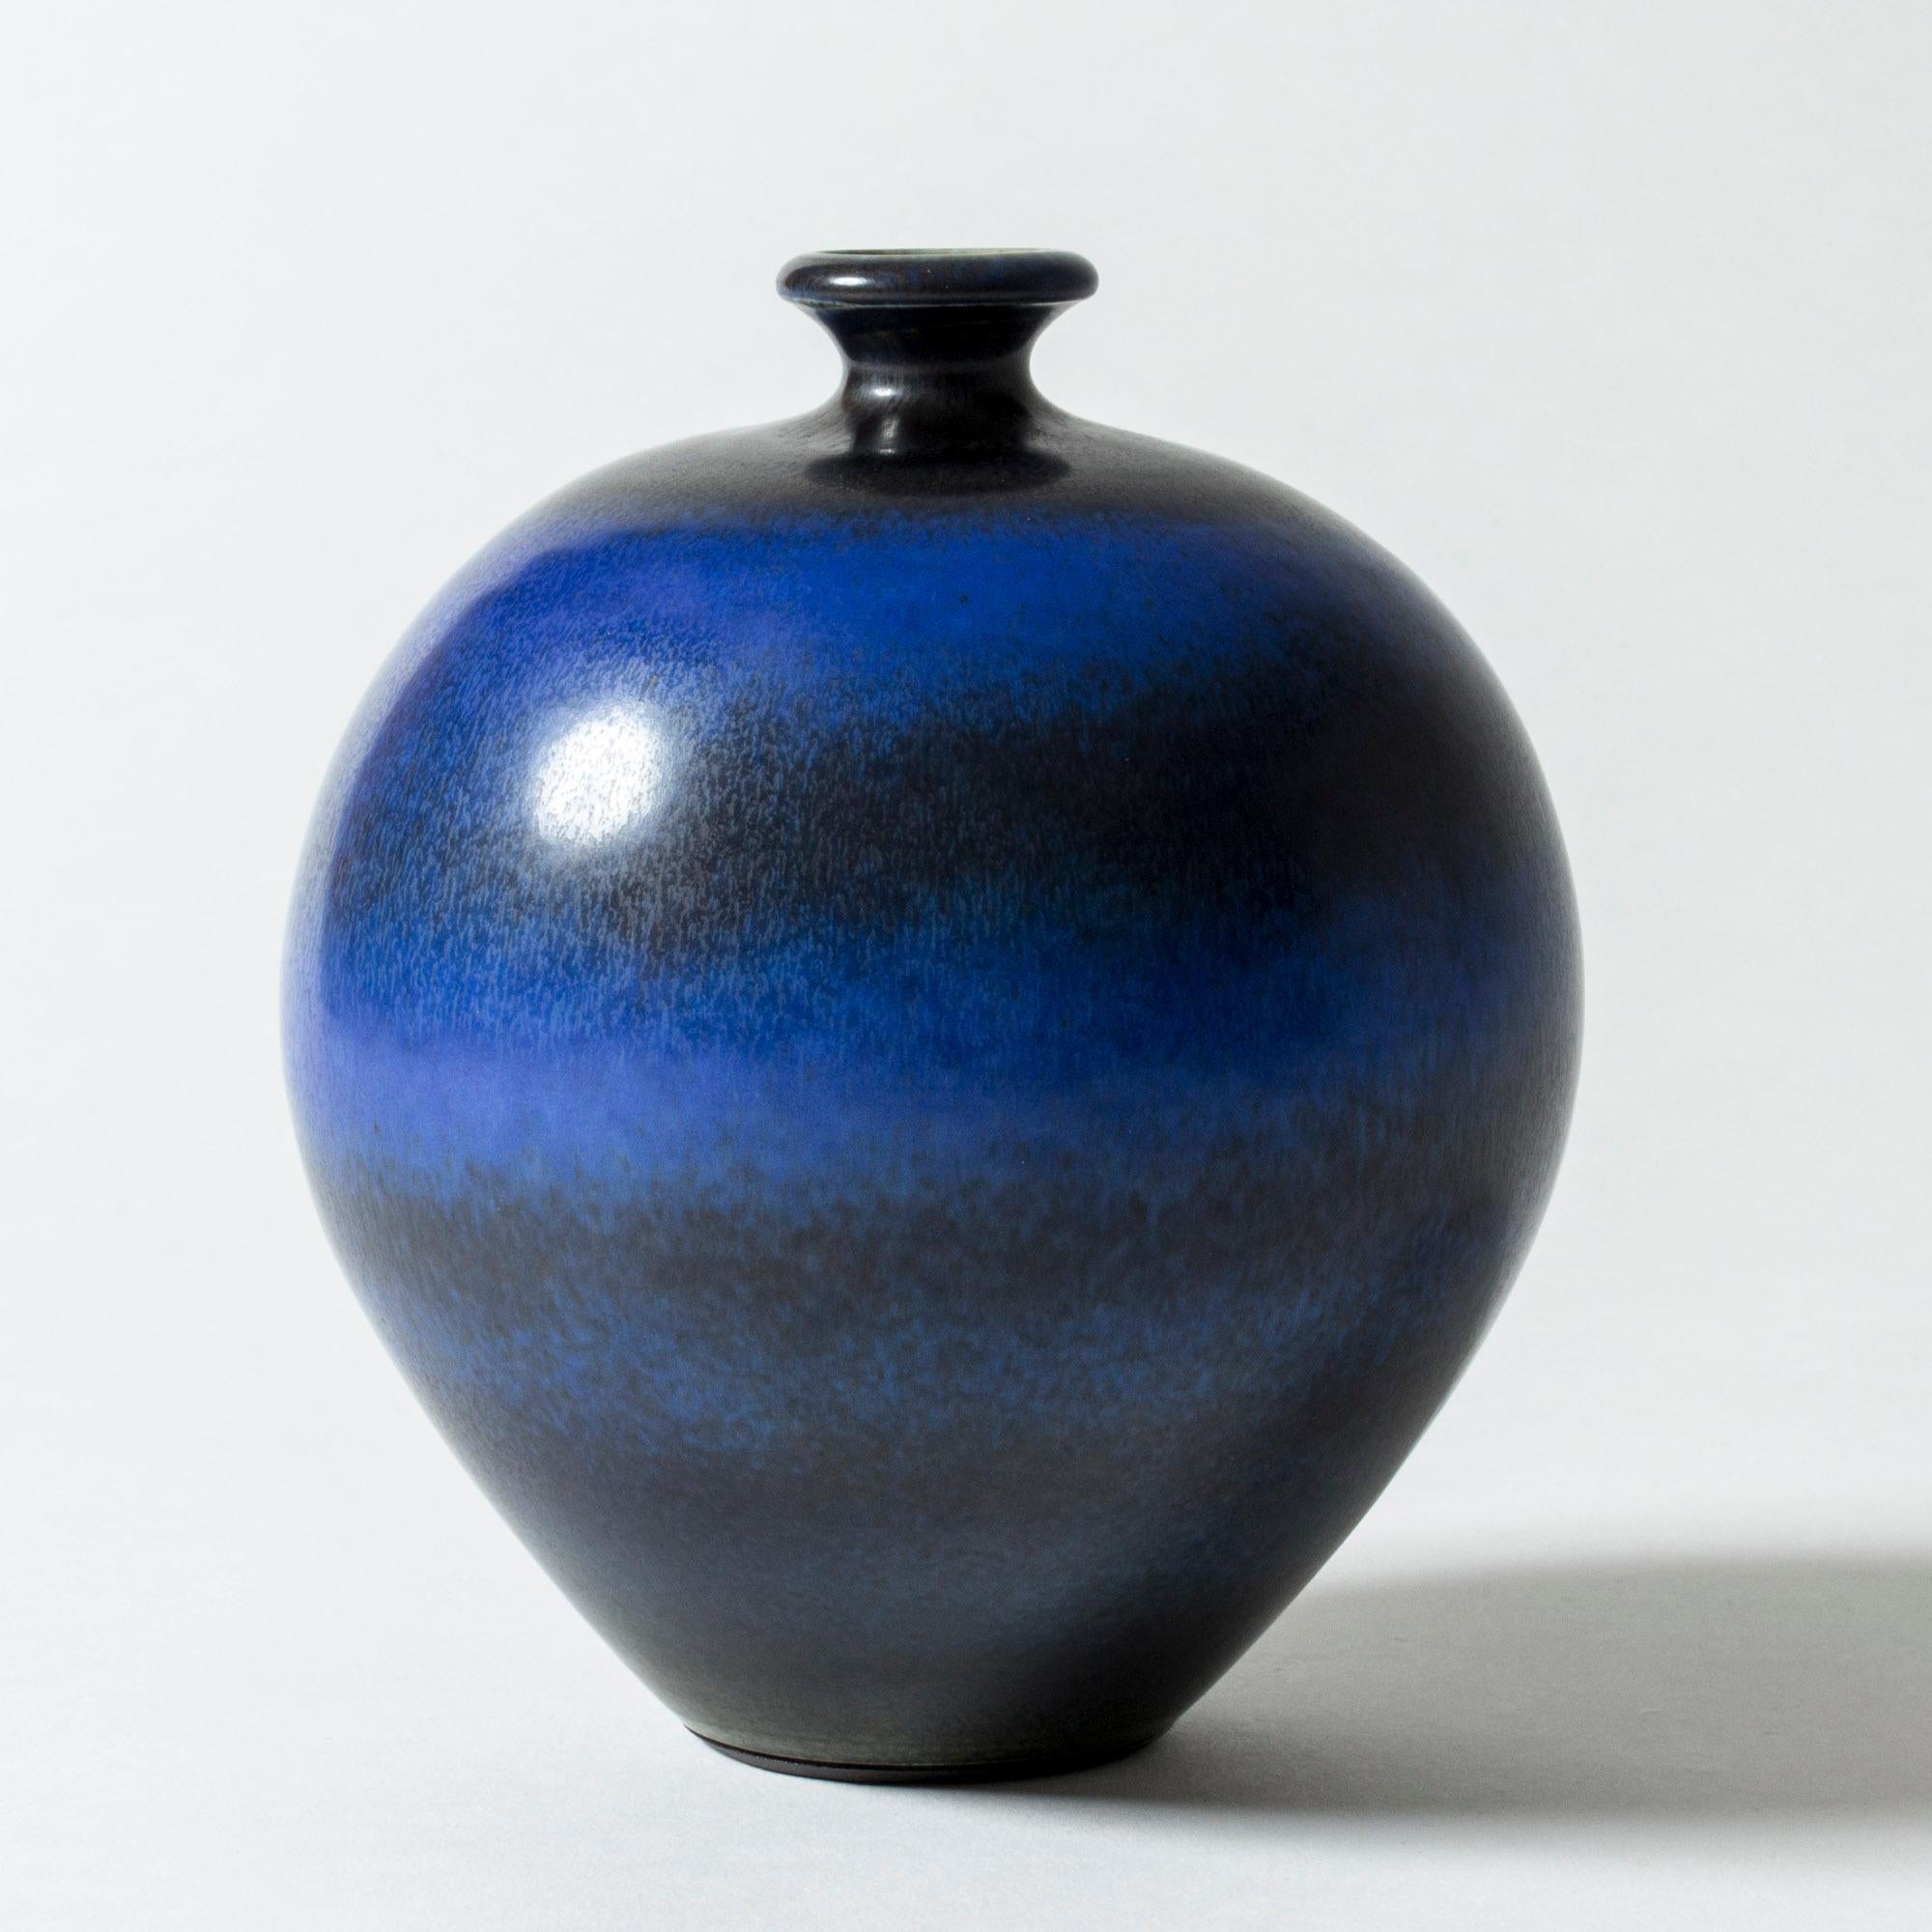 Amazing stoneware vase by Berndt Friberg, in a plump smooth form. Vibrant blue hare’s fur glaze with darker blue nuances. Deep ocean expression.